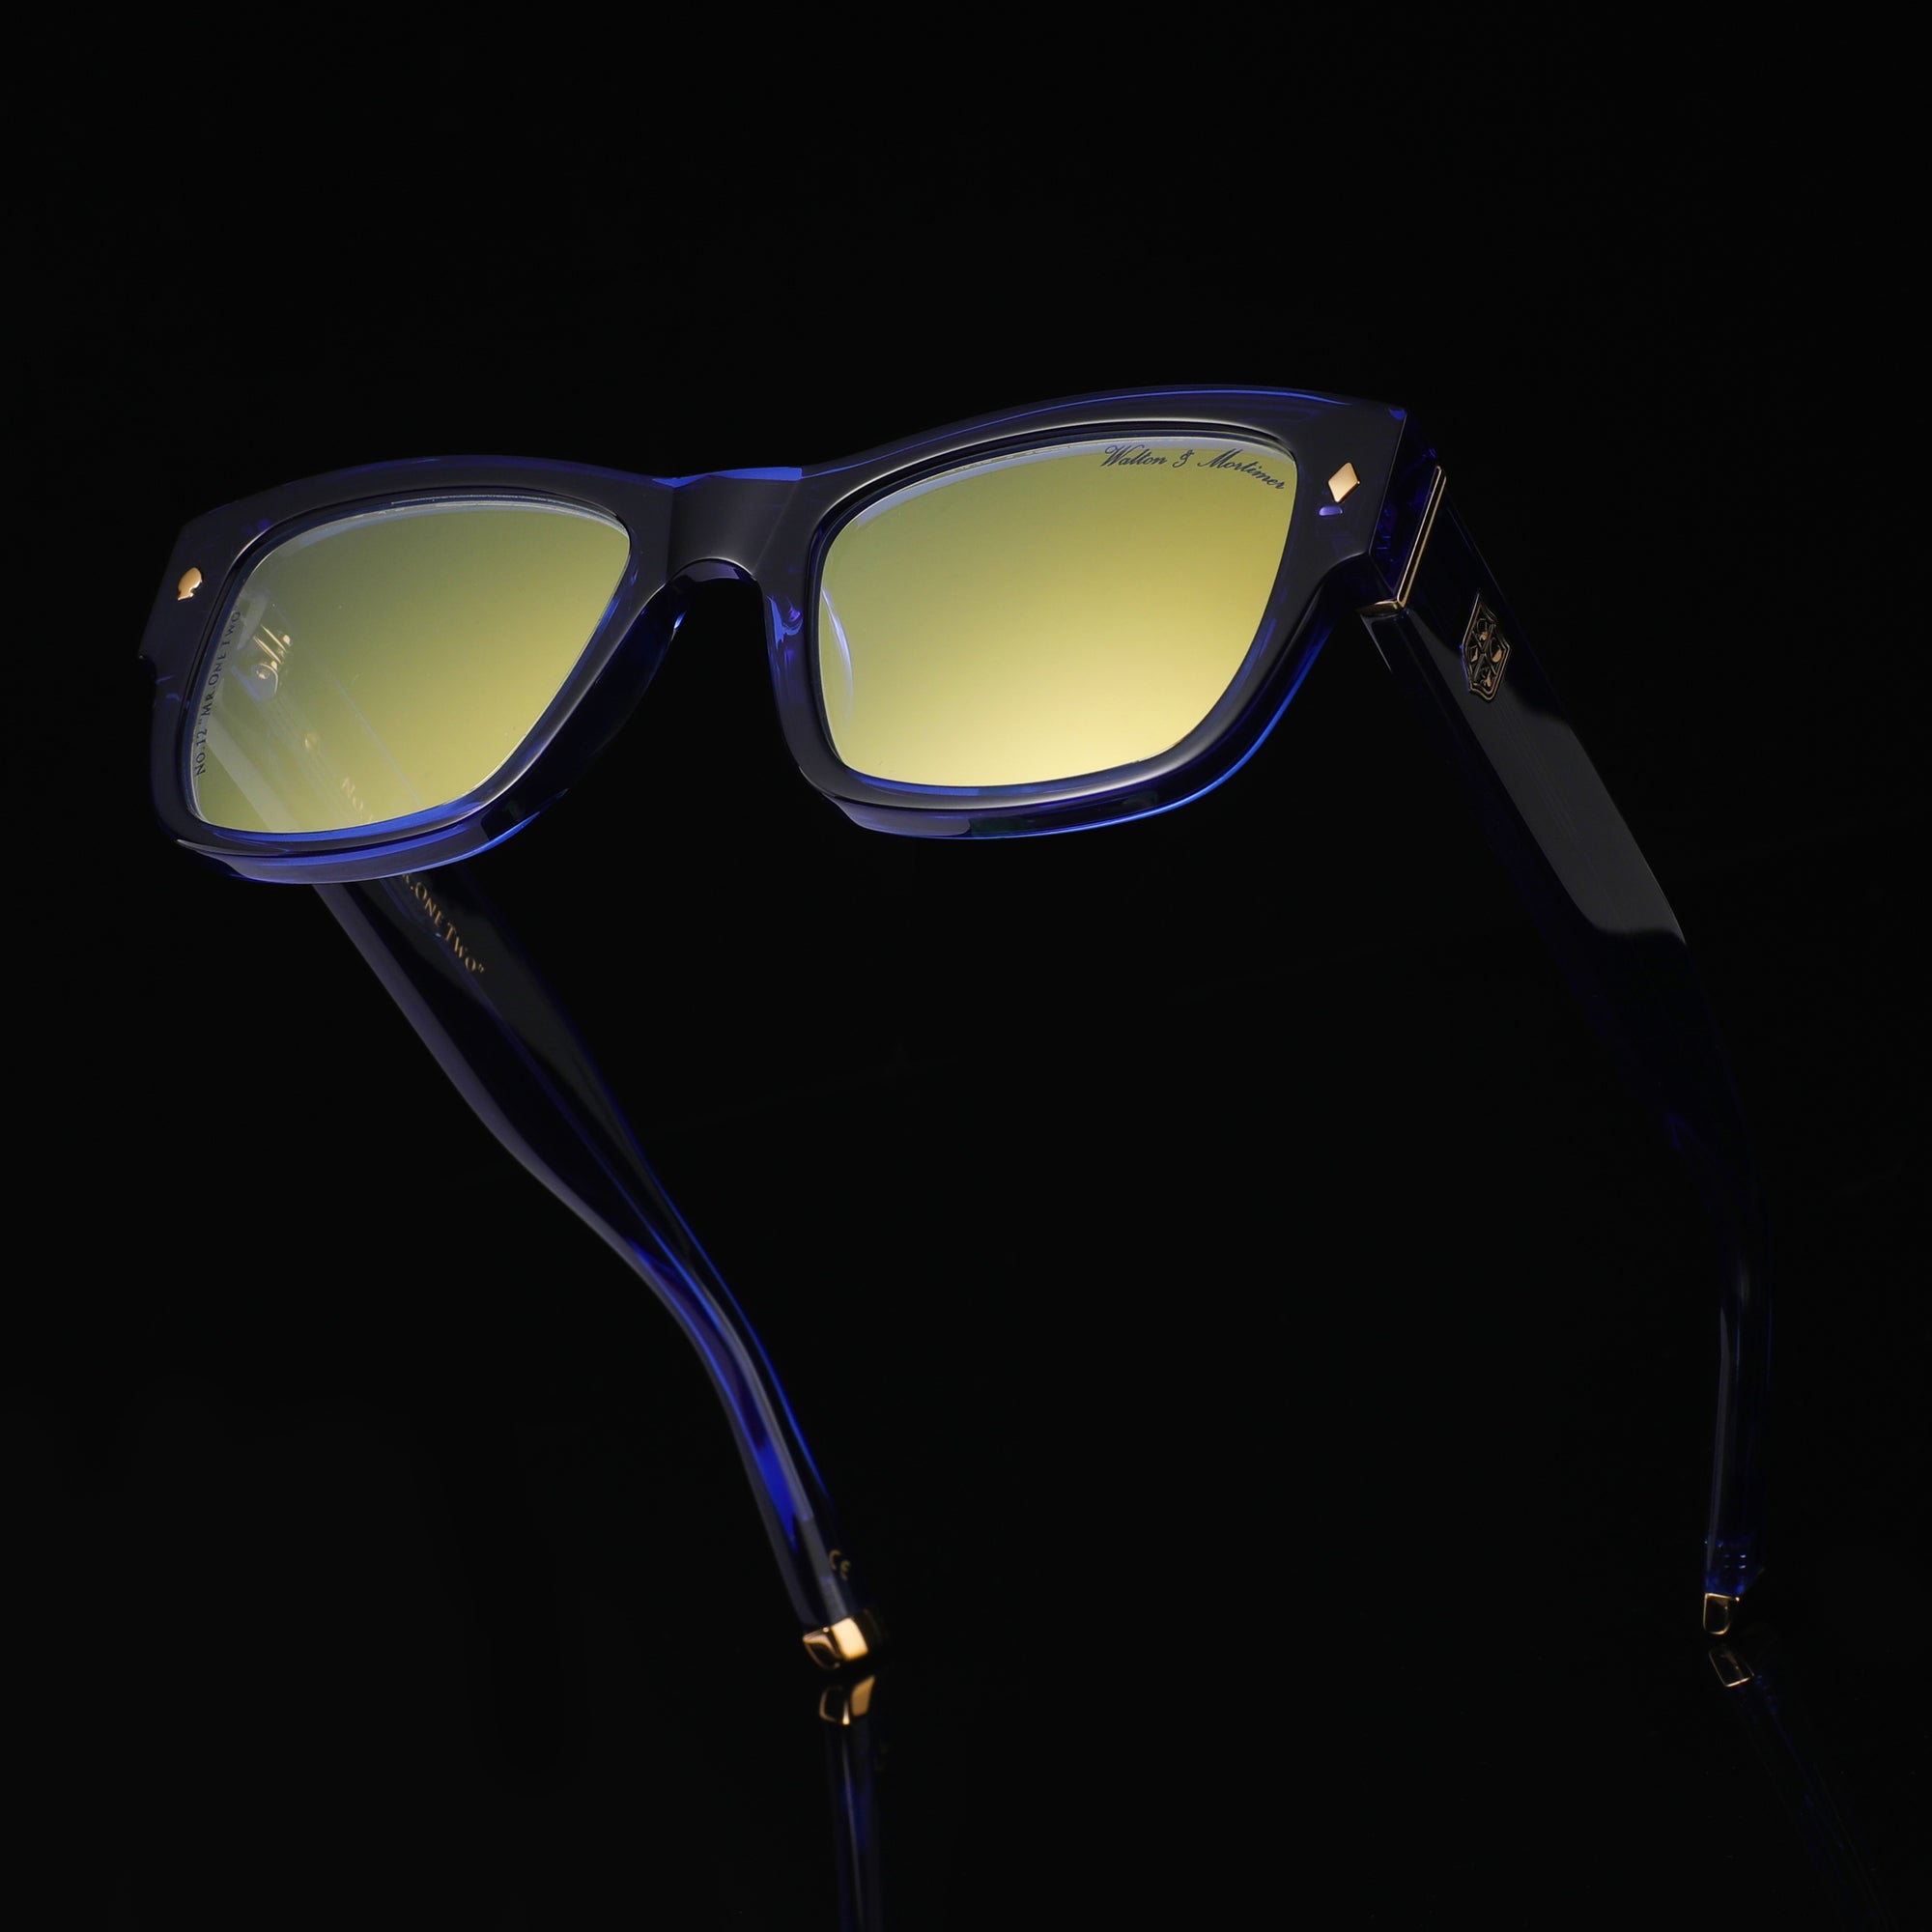 WALTON & MORTIMER® NO. 12: " Mr.One Two" Midnight Blue LIMITED EDITION SUNGLASSES